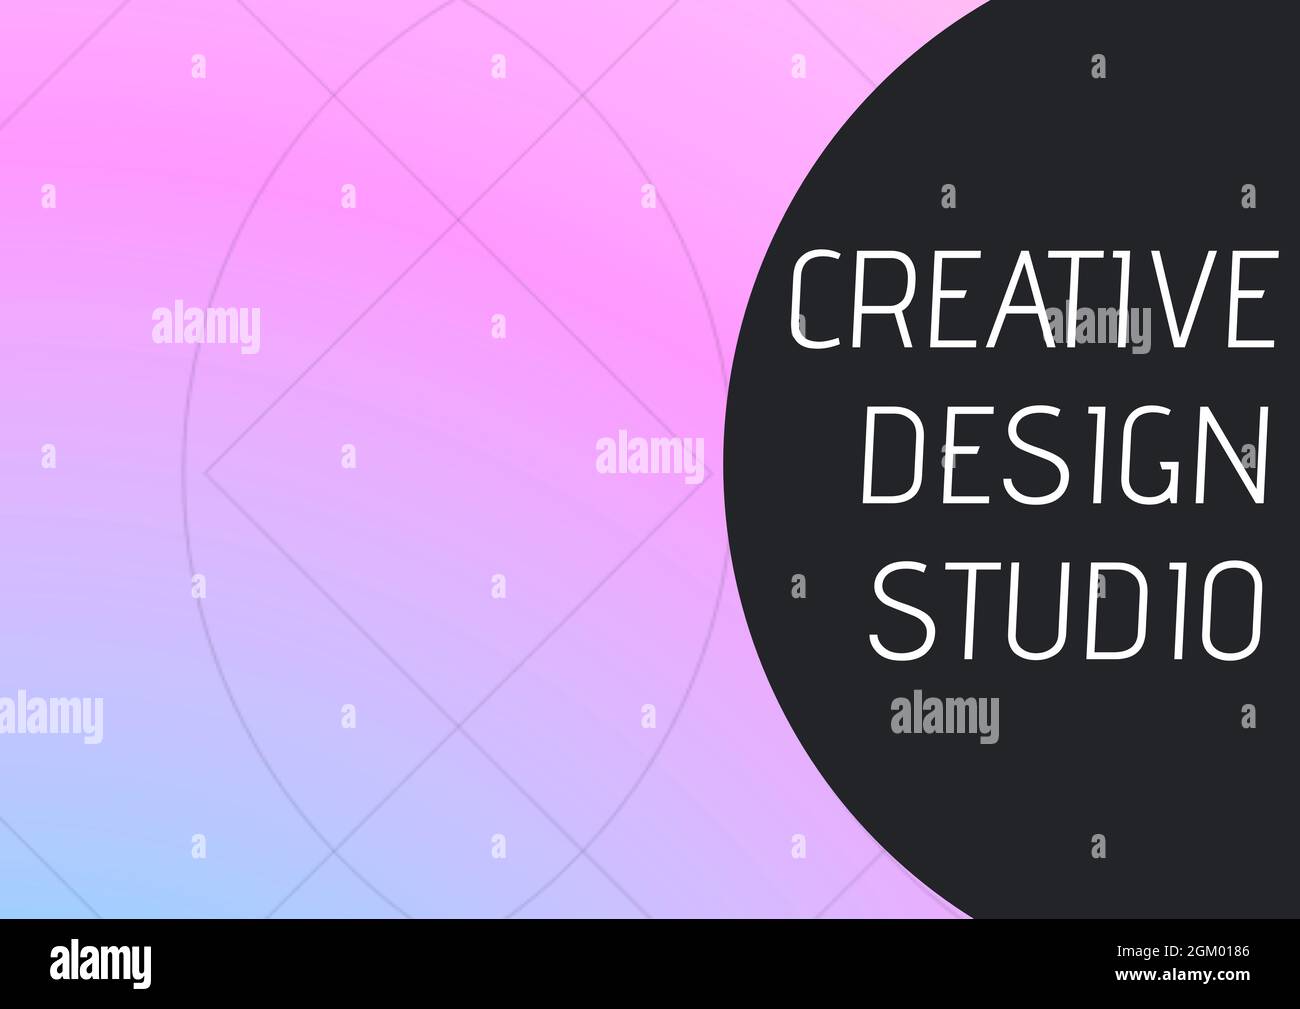 Creative design studio text banner against abstract geometric shapes on pink background Stock Photo